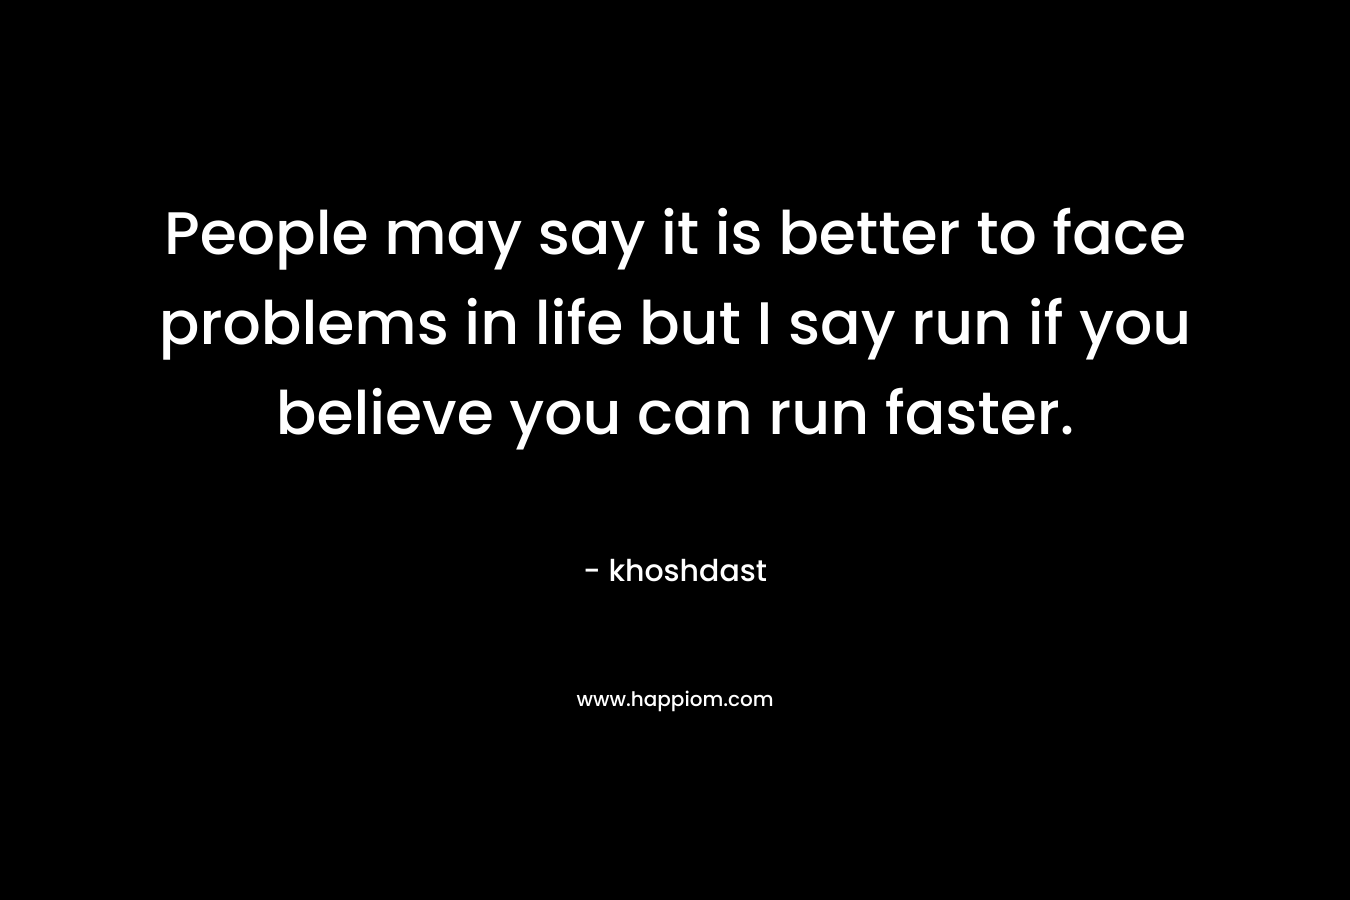 People may say it is better to face problems in life but I say run if you believe you can run faster. – khoshdast